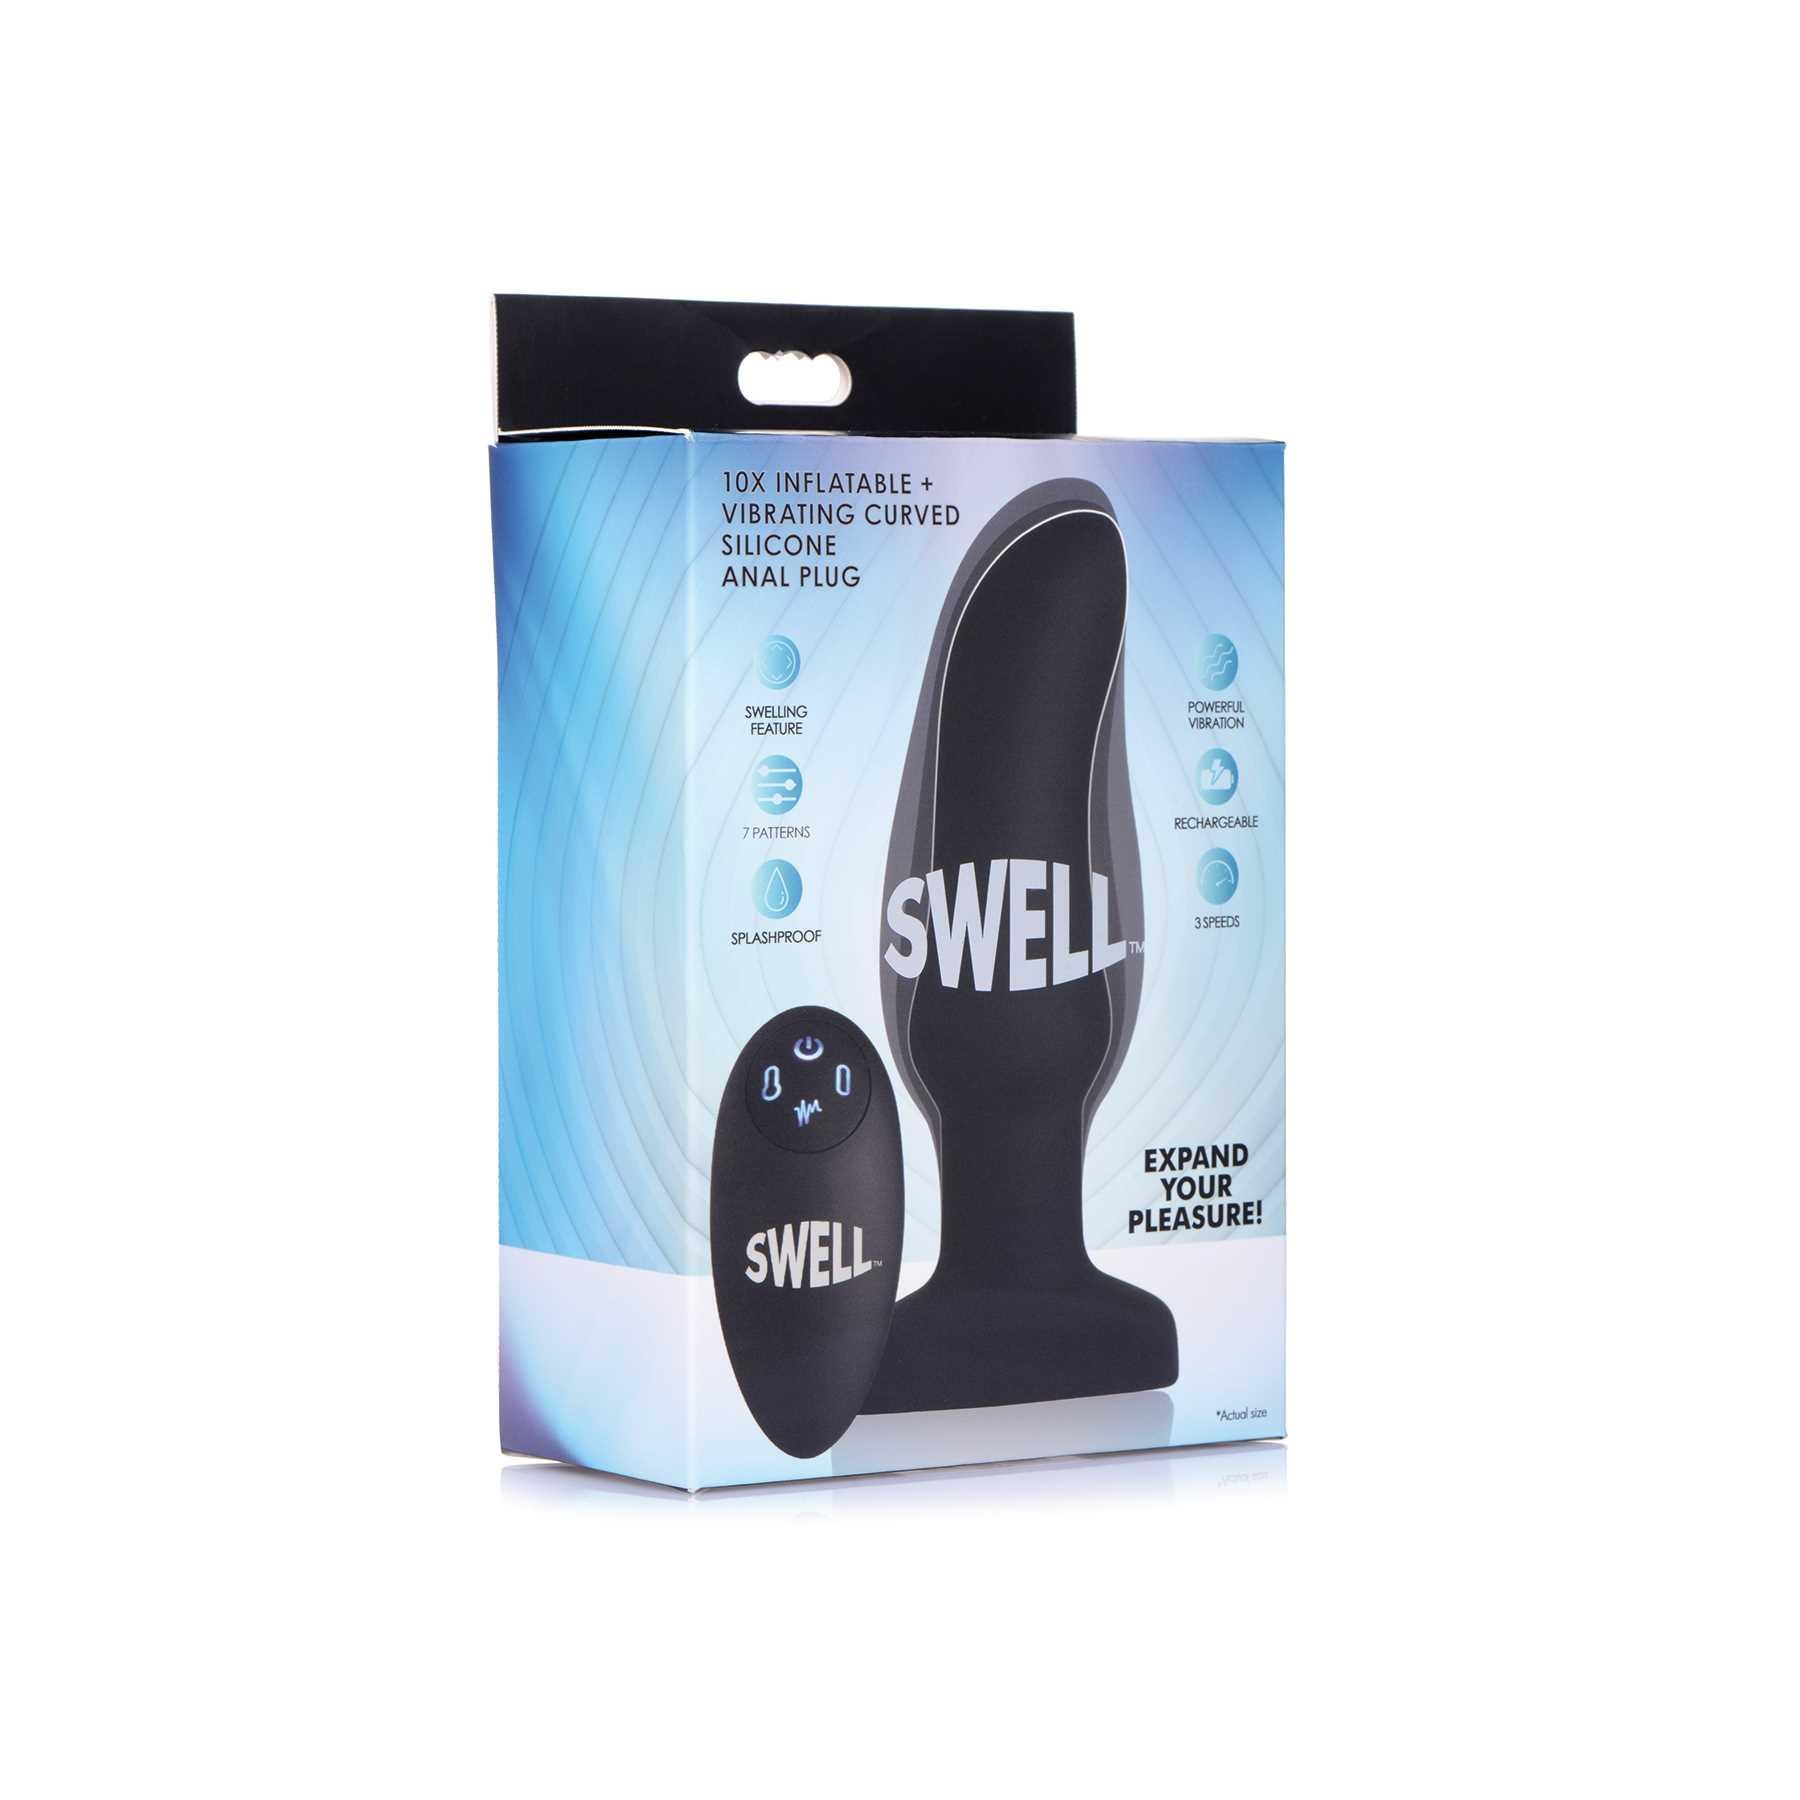 Swell 10X Inflatable Vibrating Curved Plug box